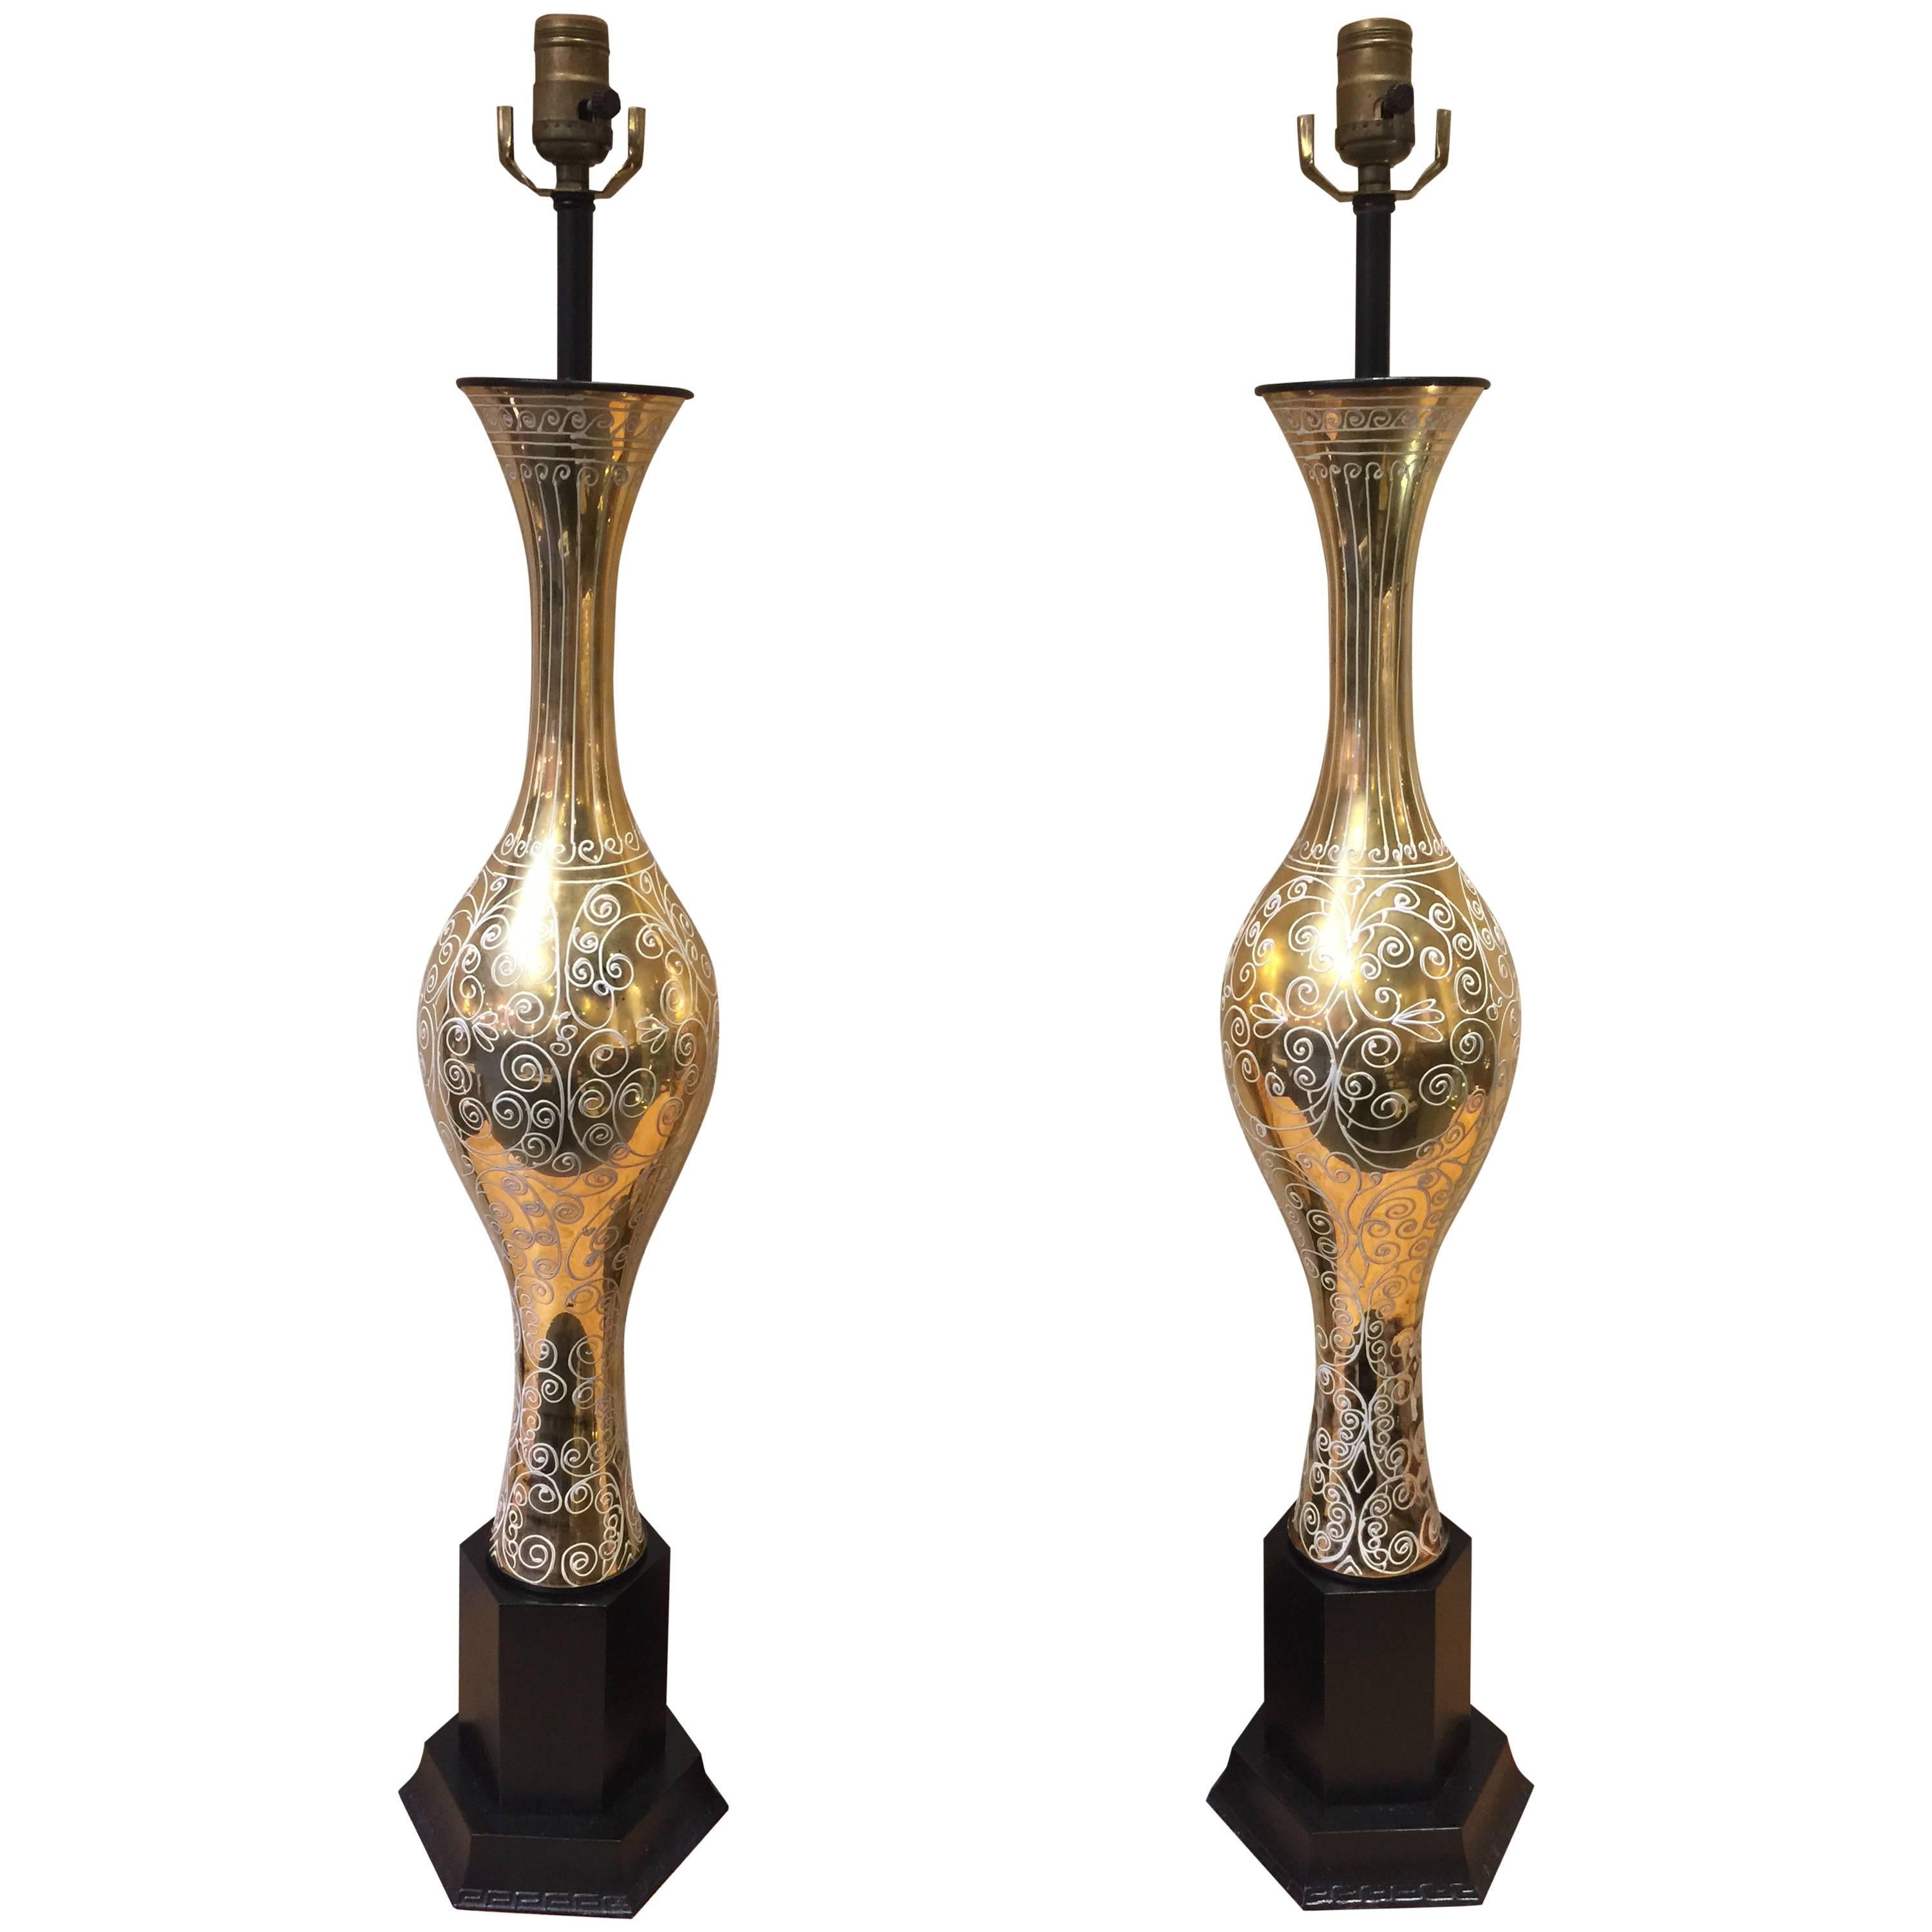 Tall Pair of Gilt and Enameled Murano Glass Lamps